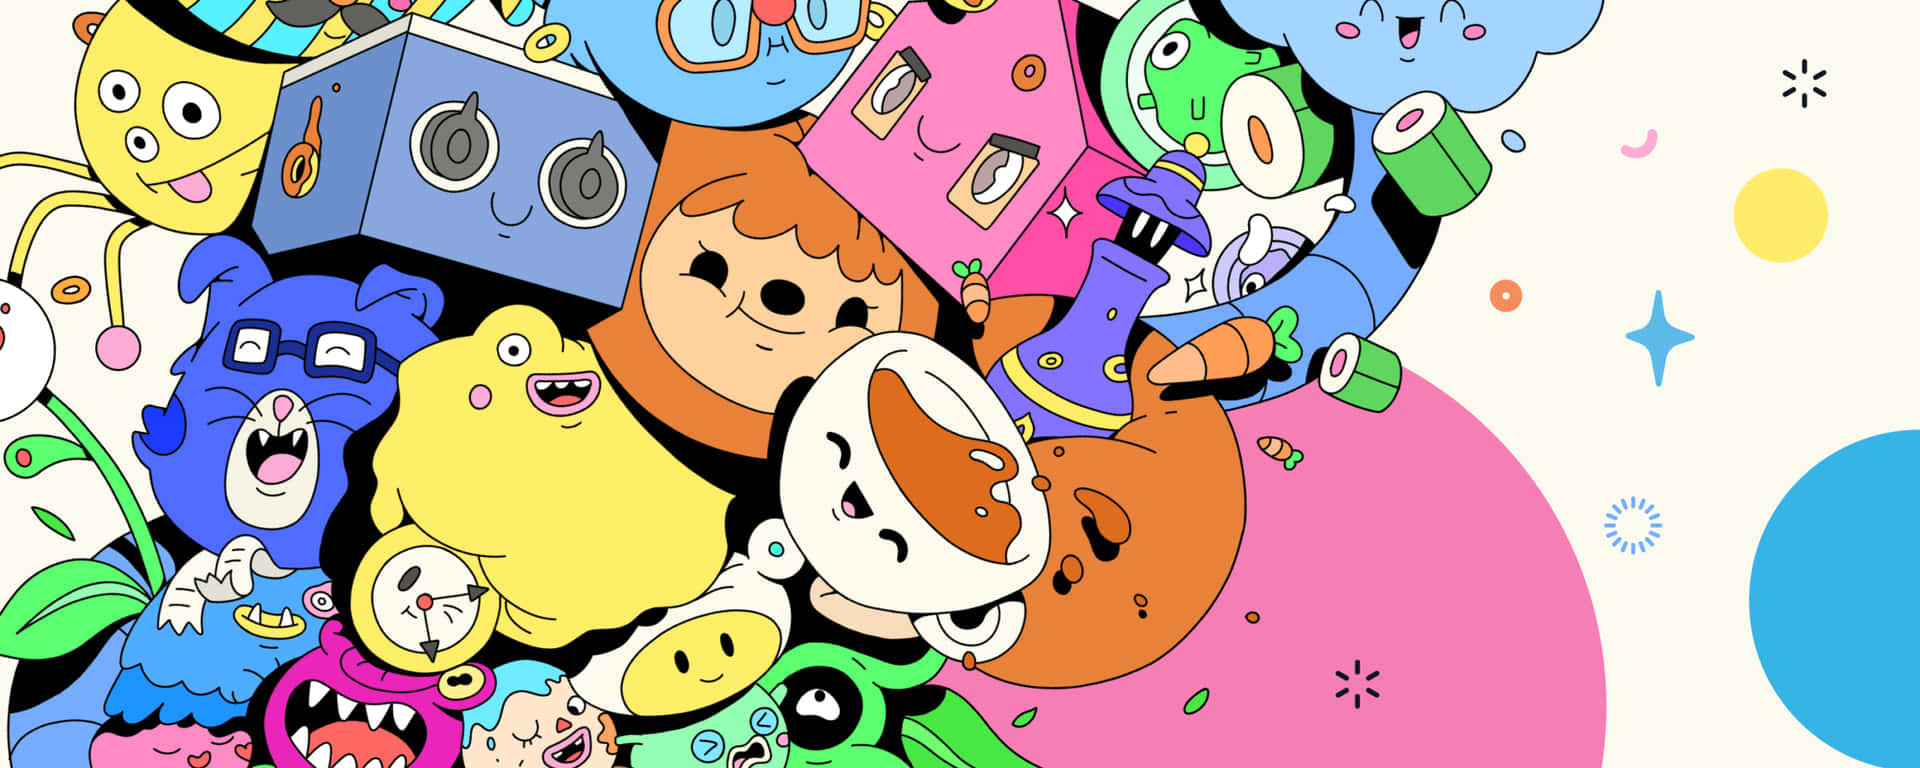 A Group Of Cartoon Characters In A Circle Wallpaper